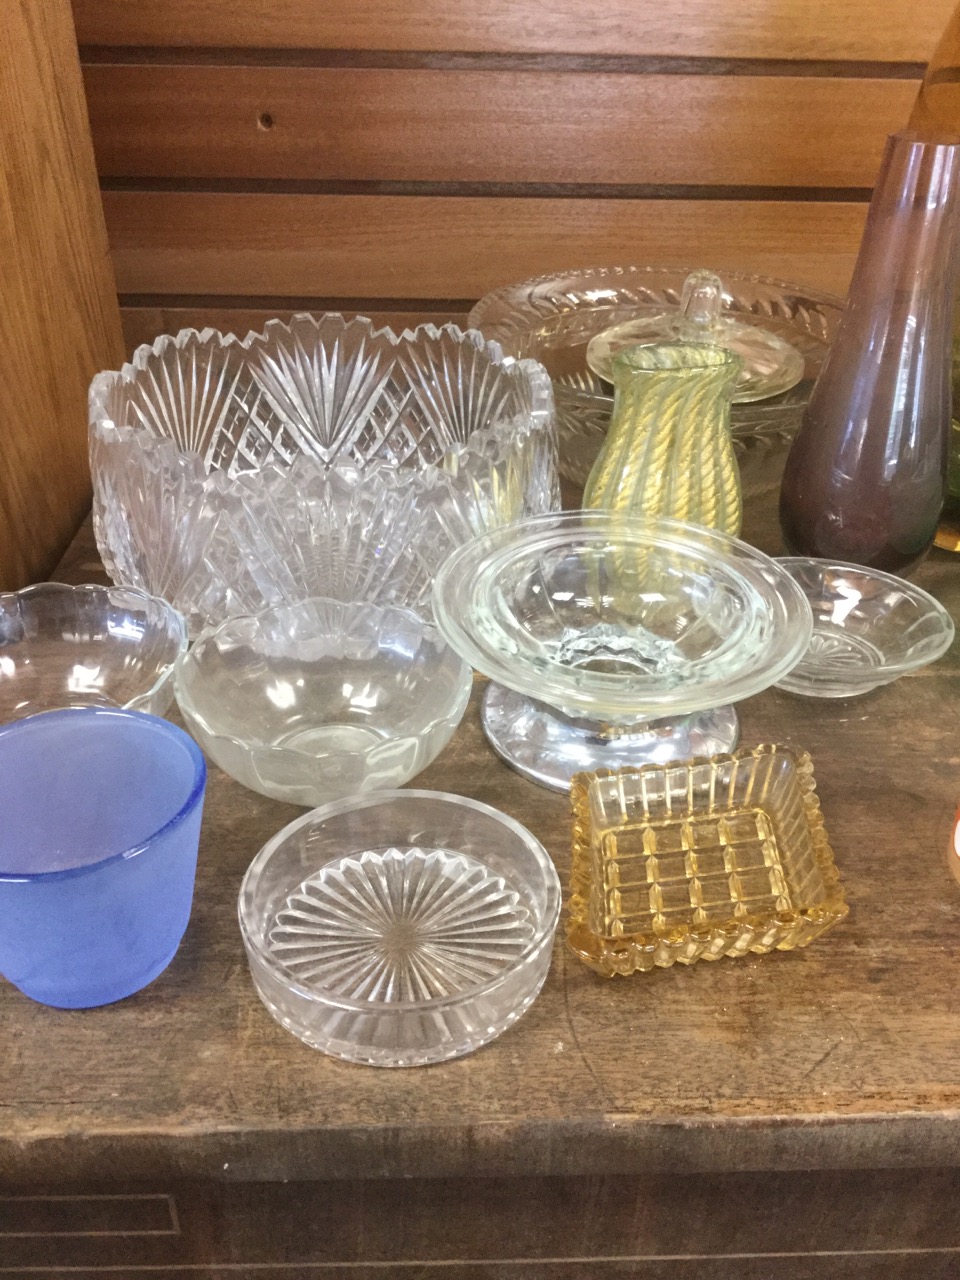 Miscellaneous glass including a signed vase engraved with a wren, bowls, vases, art glass, ashtrays, - Image 3 of 3